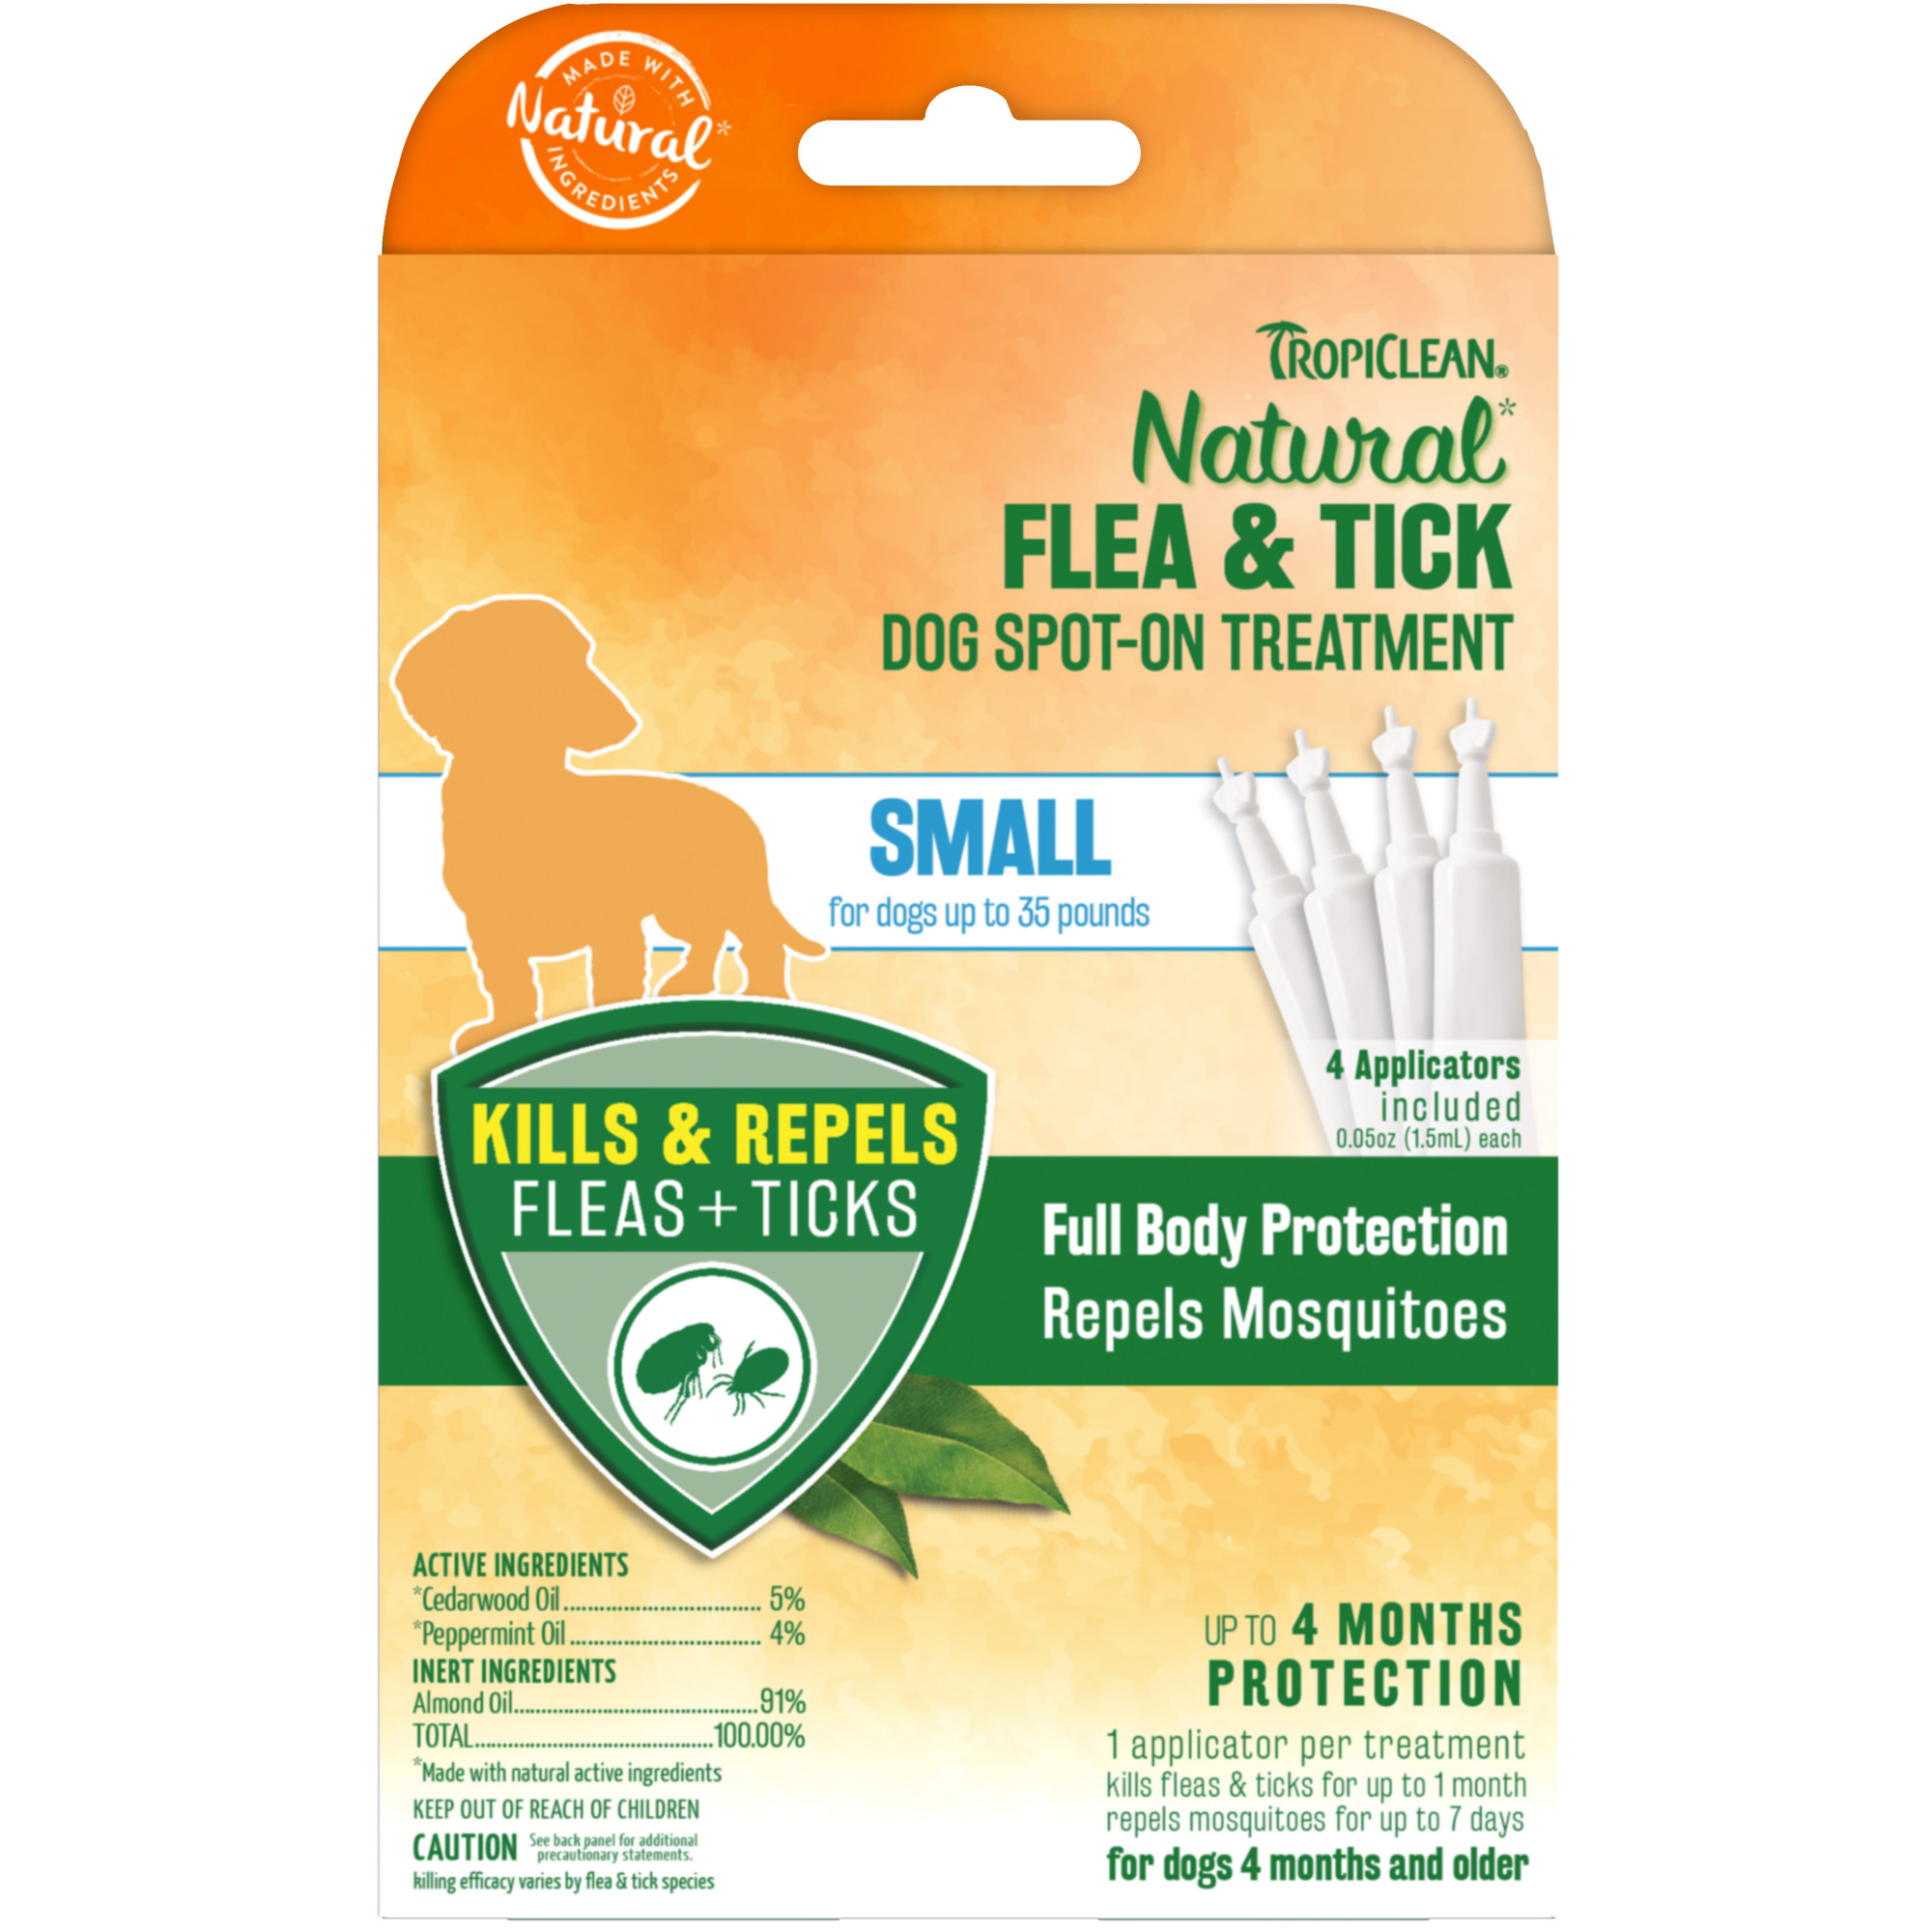 Flea & Tick Spot-On Treatment for Small Dogs